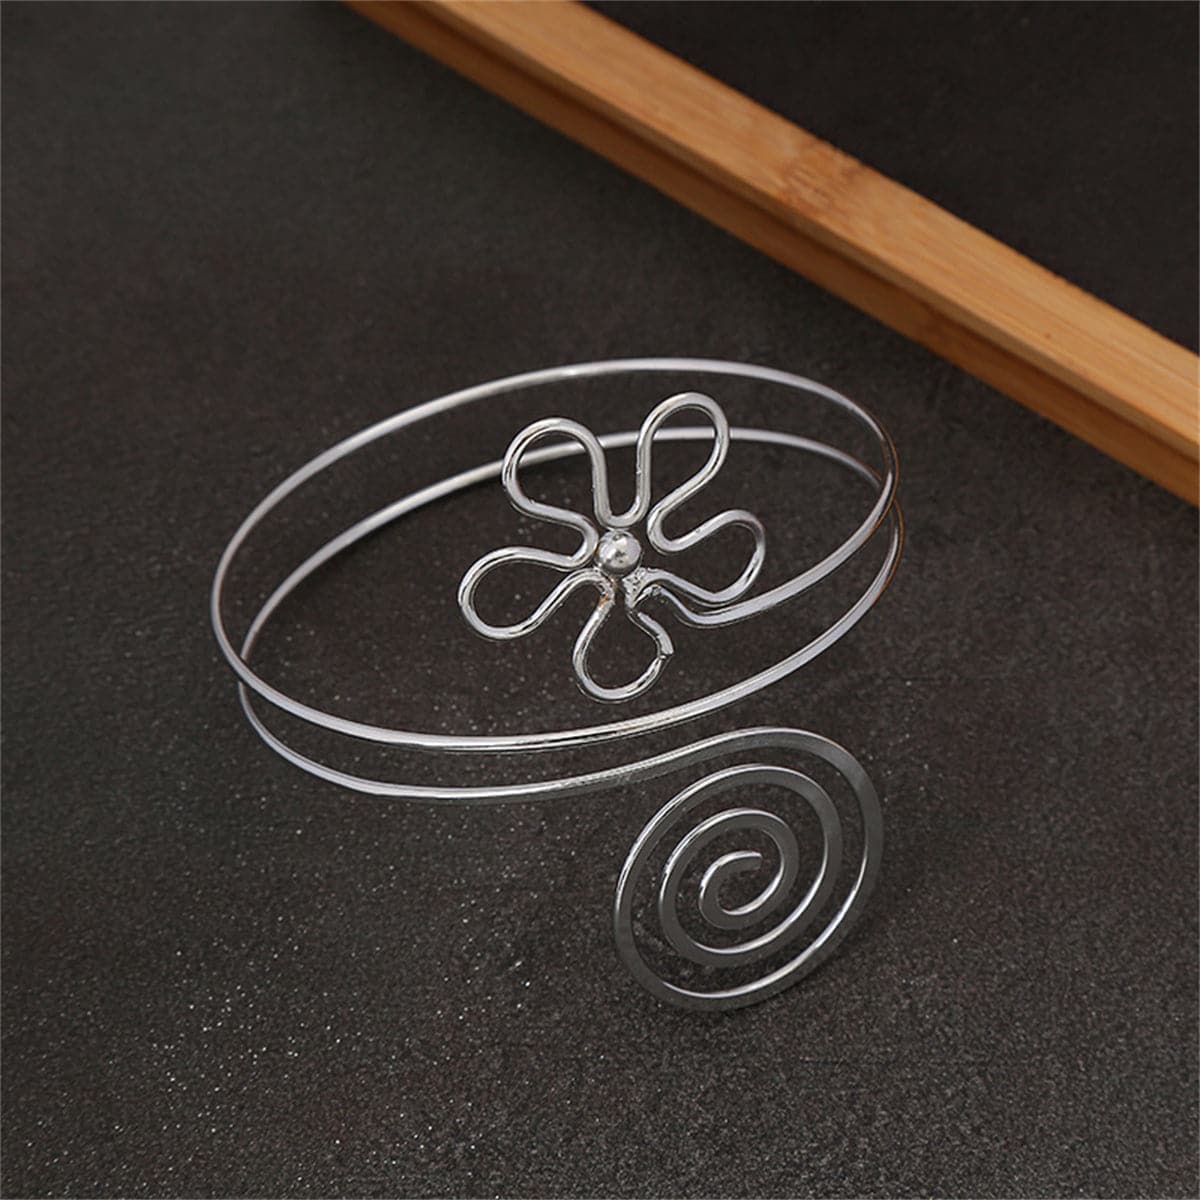 Silver-Plated Floral Swirl Arm Cuff